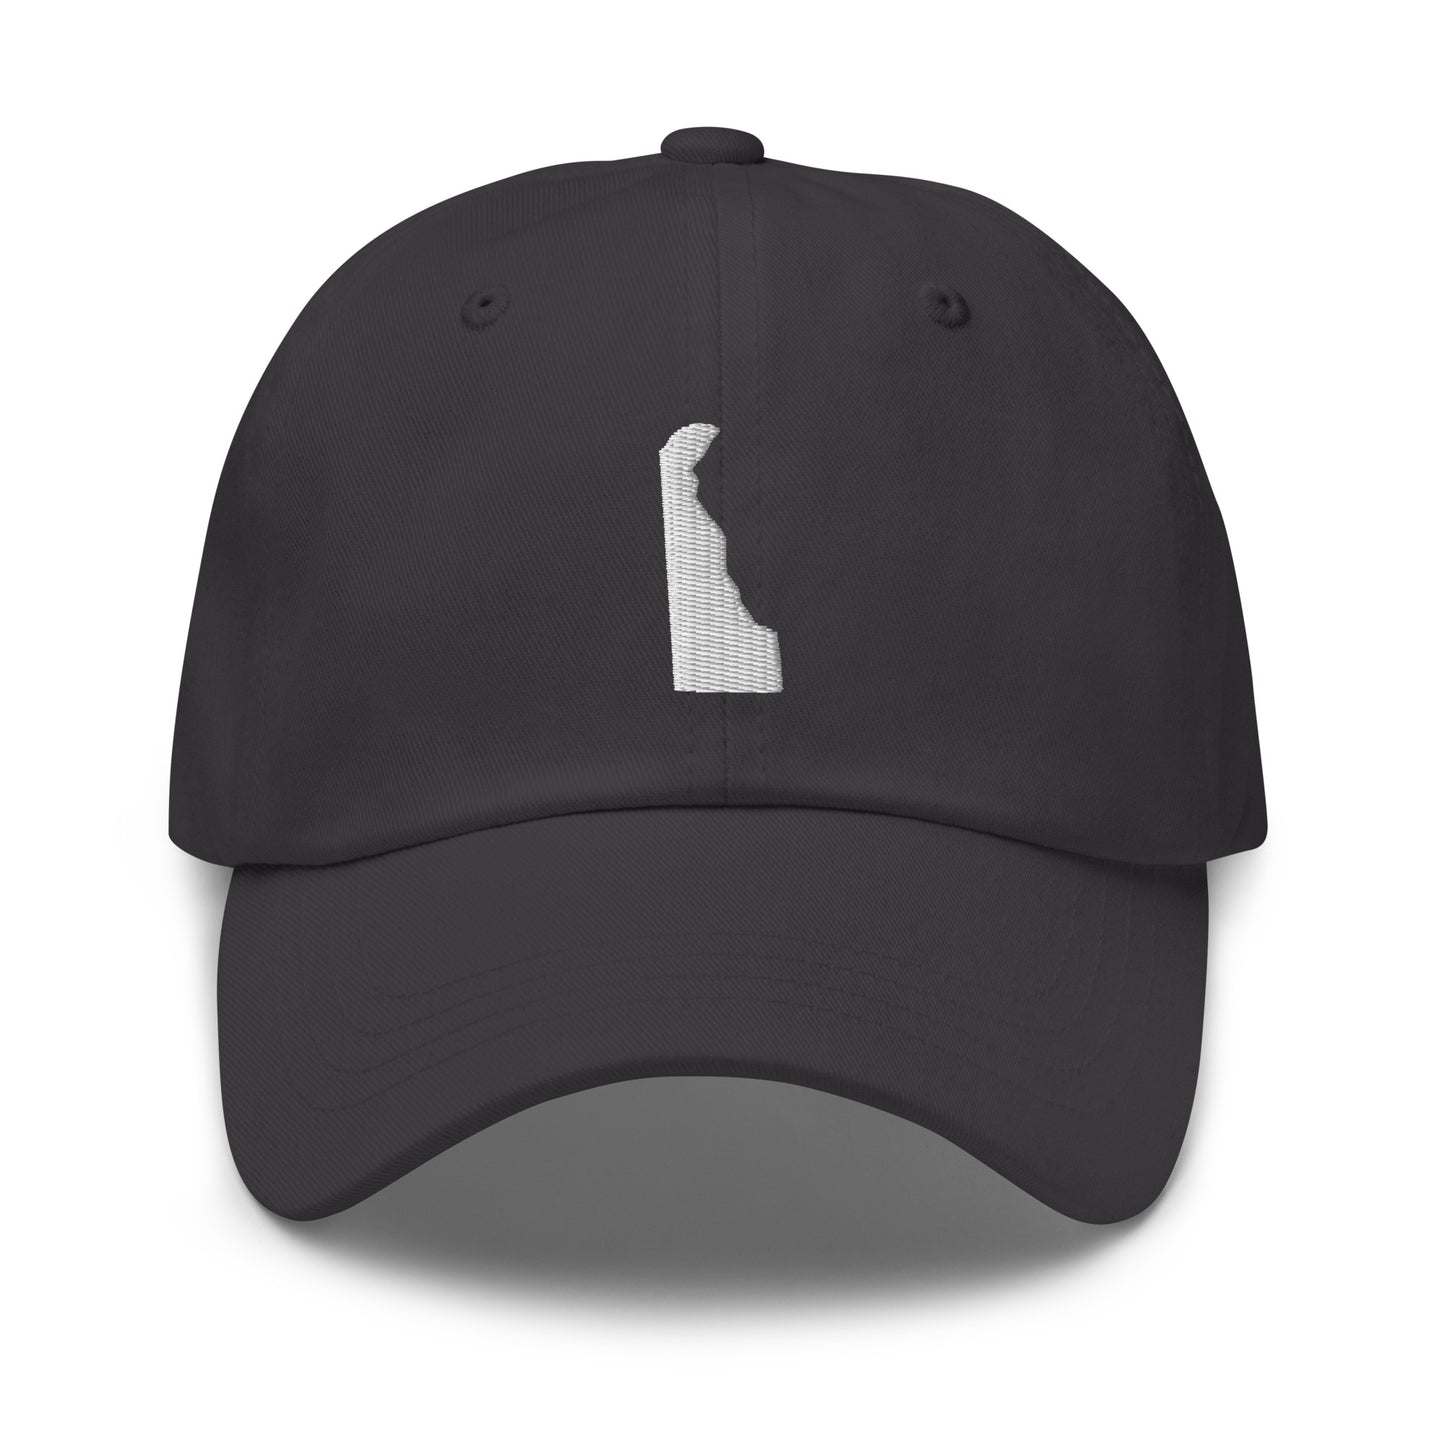 Delaware State Silhouette Dad Hat